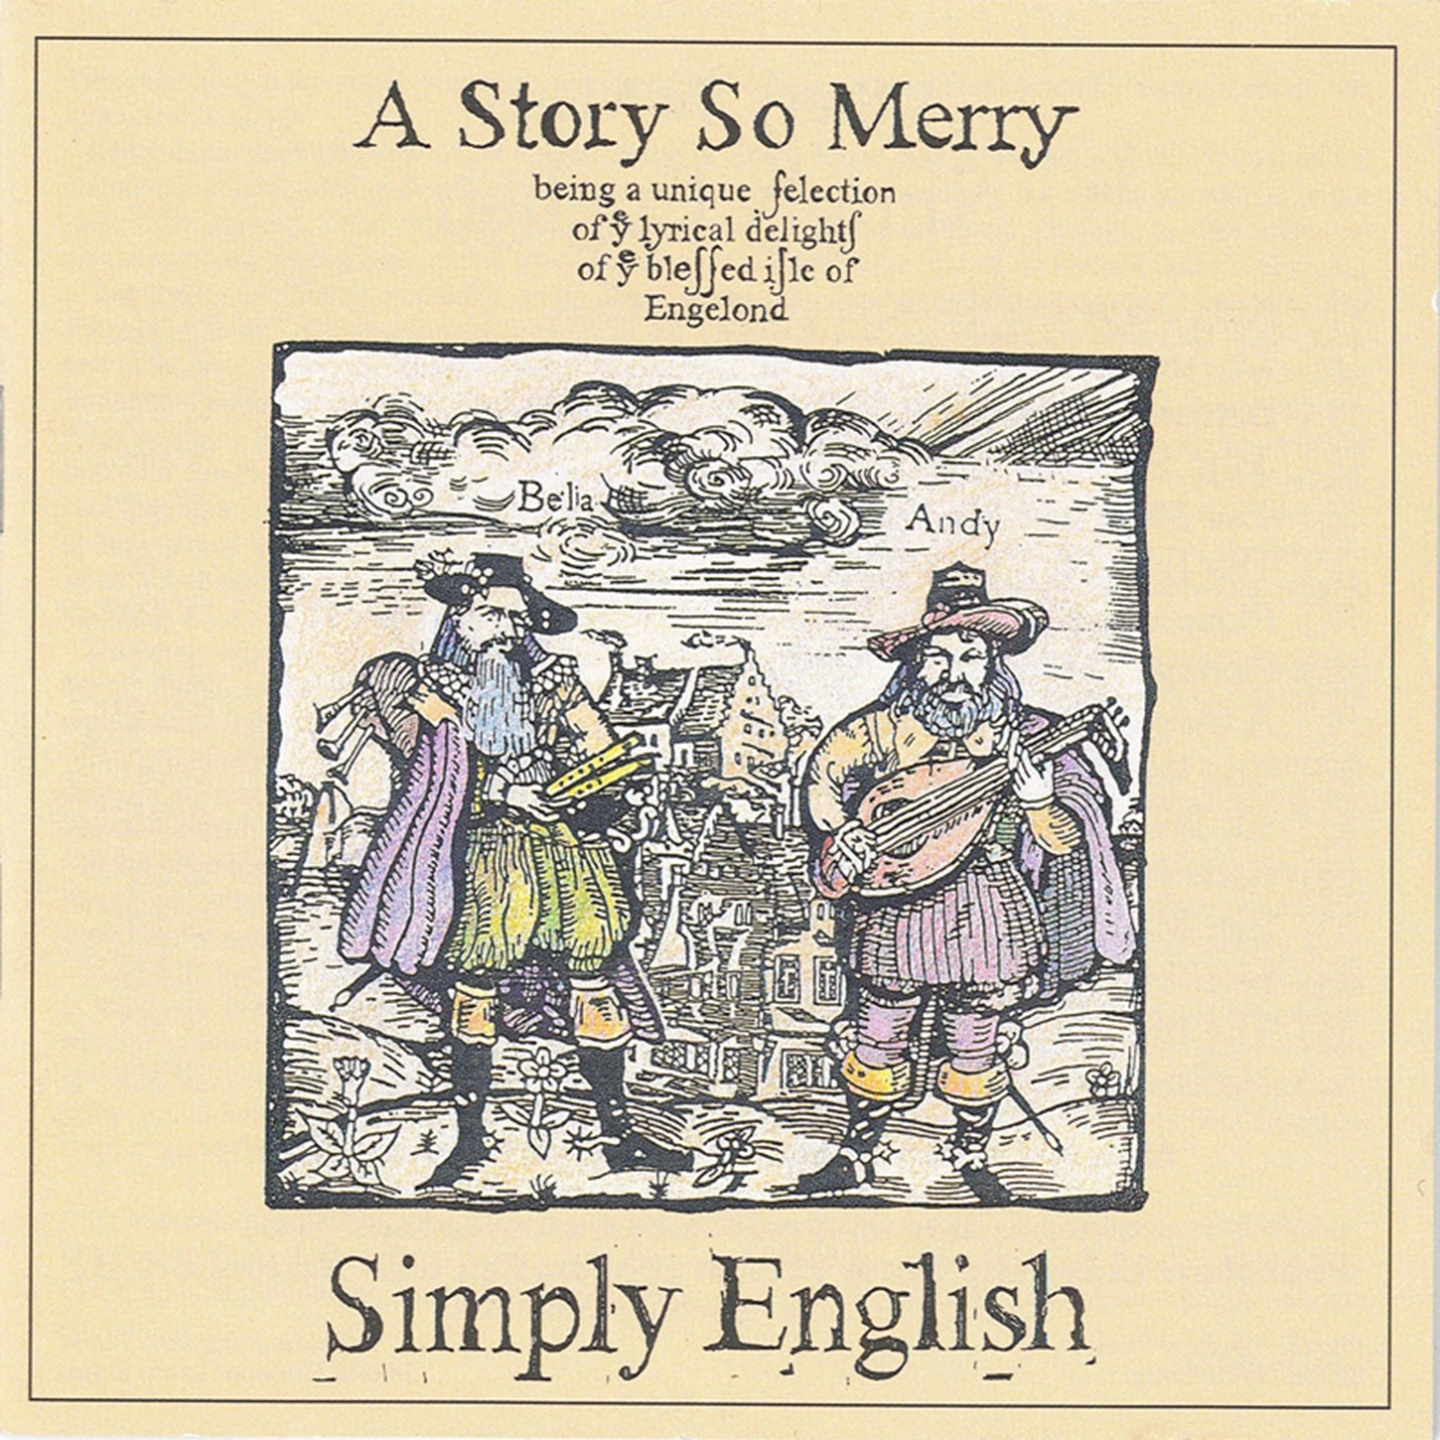 A Story So Merry